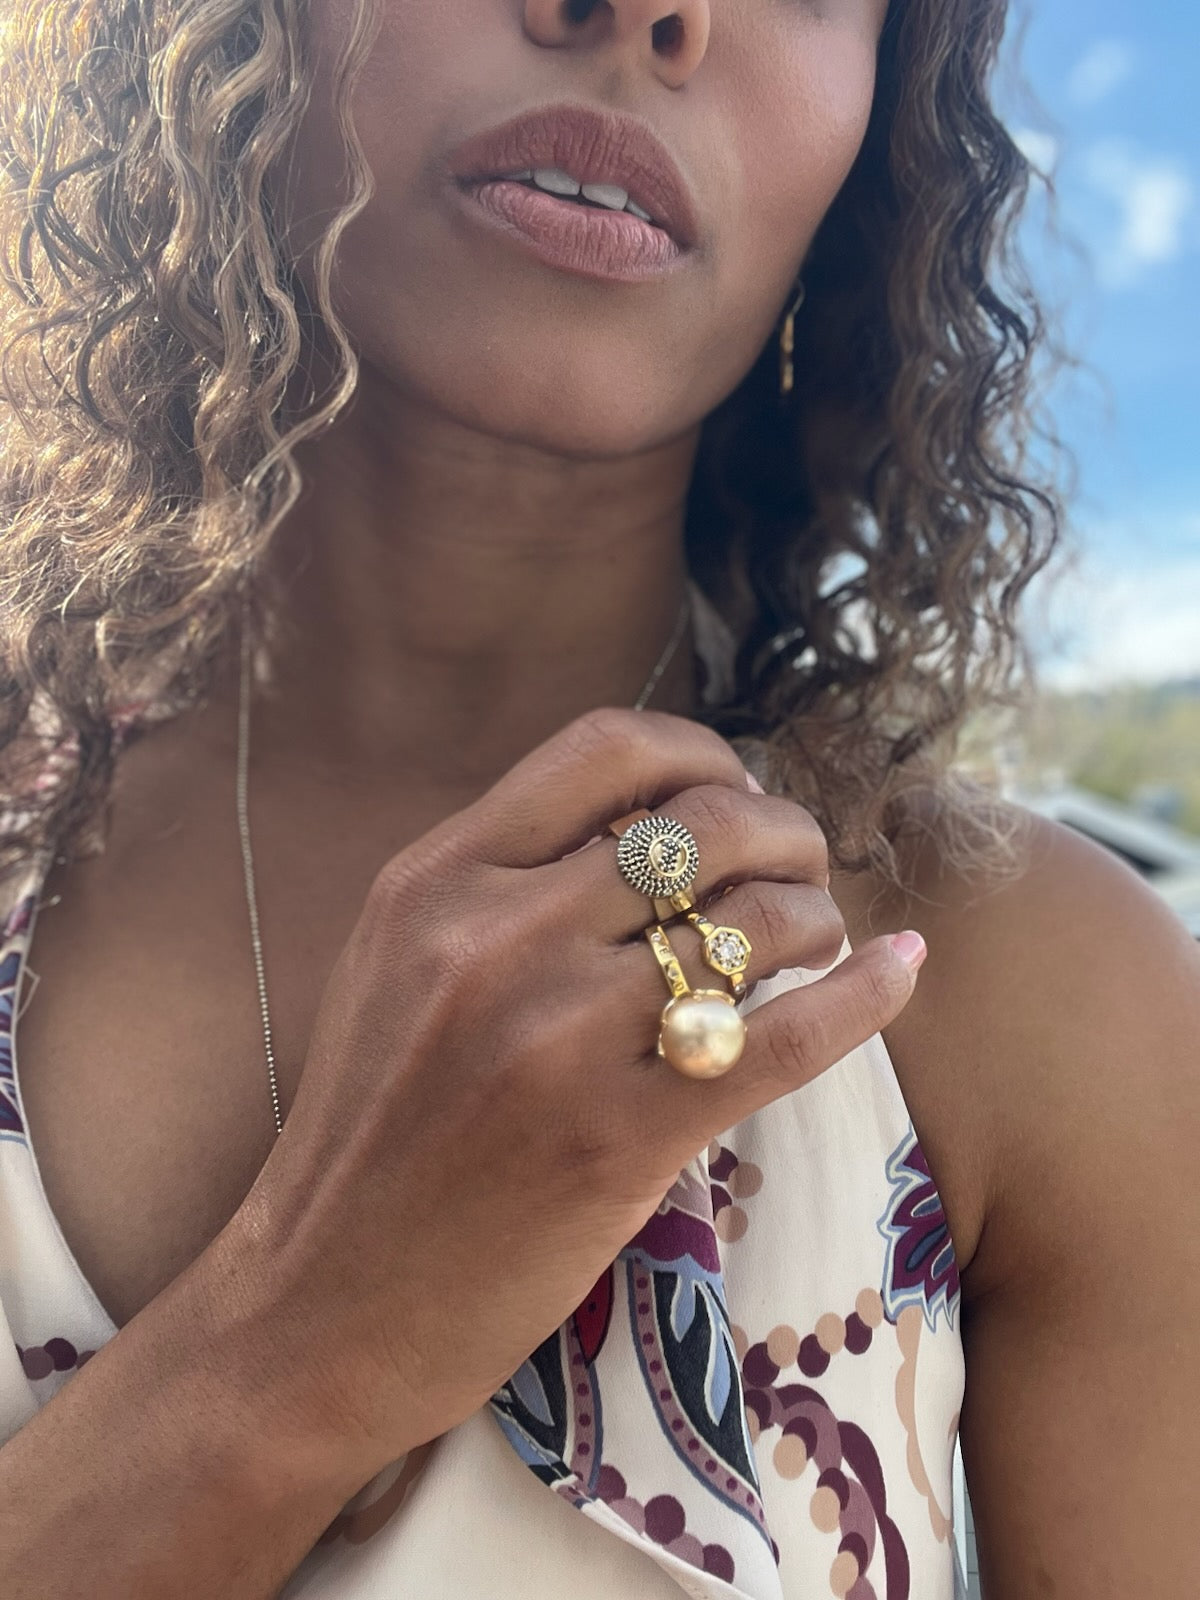 Black woman in floral dress outside on beach wearing the infinity Gold 8 sided octagon ring with an eight ball inscribed in black diamonds from the wandering jewel